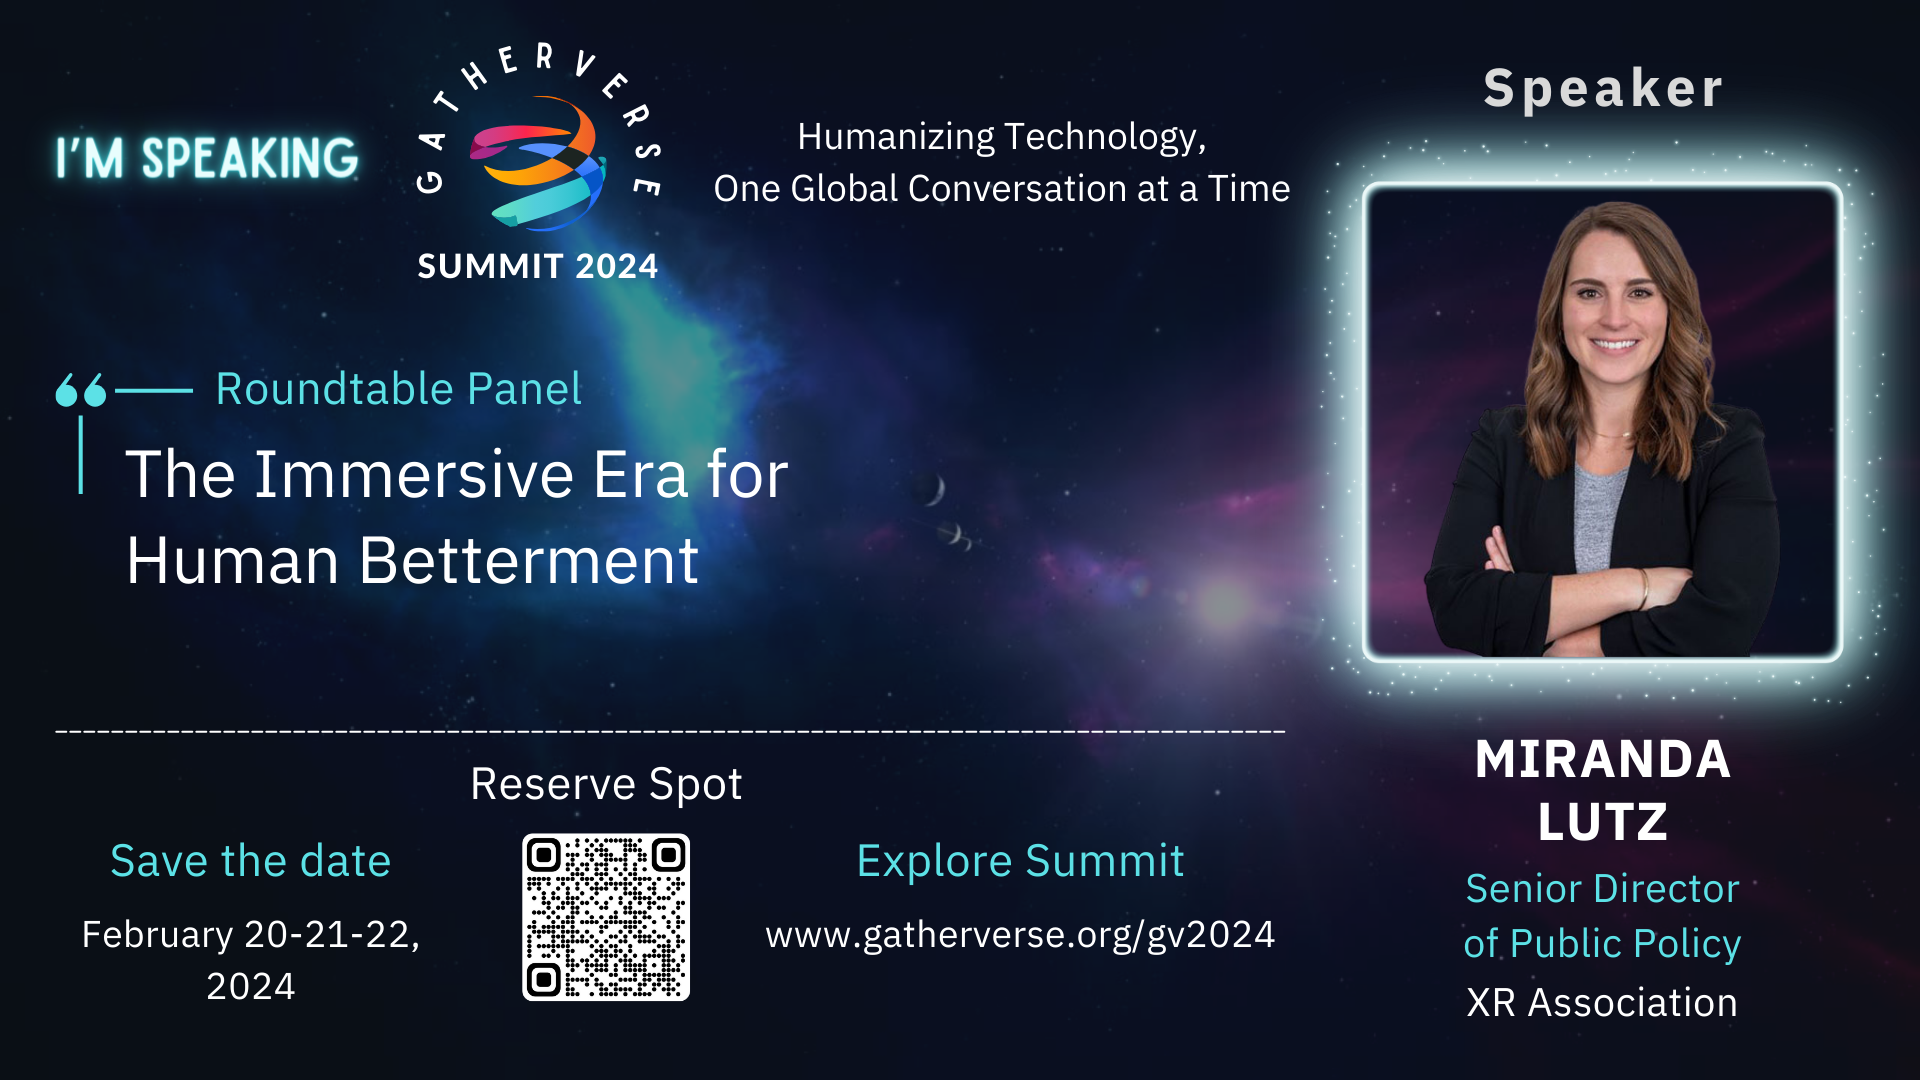 XRA’S SENIOR DIRECTOR OF PUBLIC POLICY TO JOIN ROUNDTABLE AT GATHERVERSE SUMMIT 2024